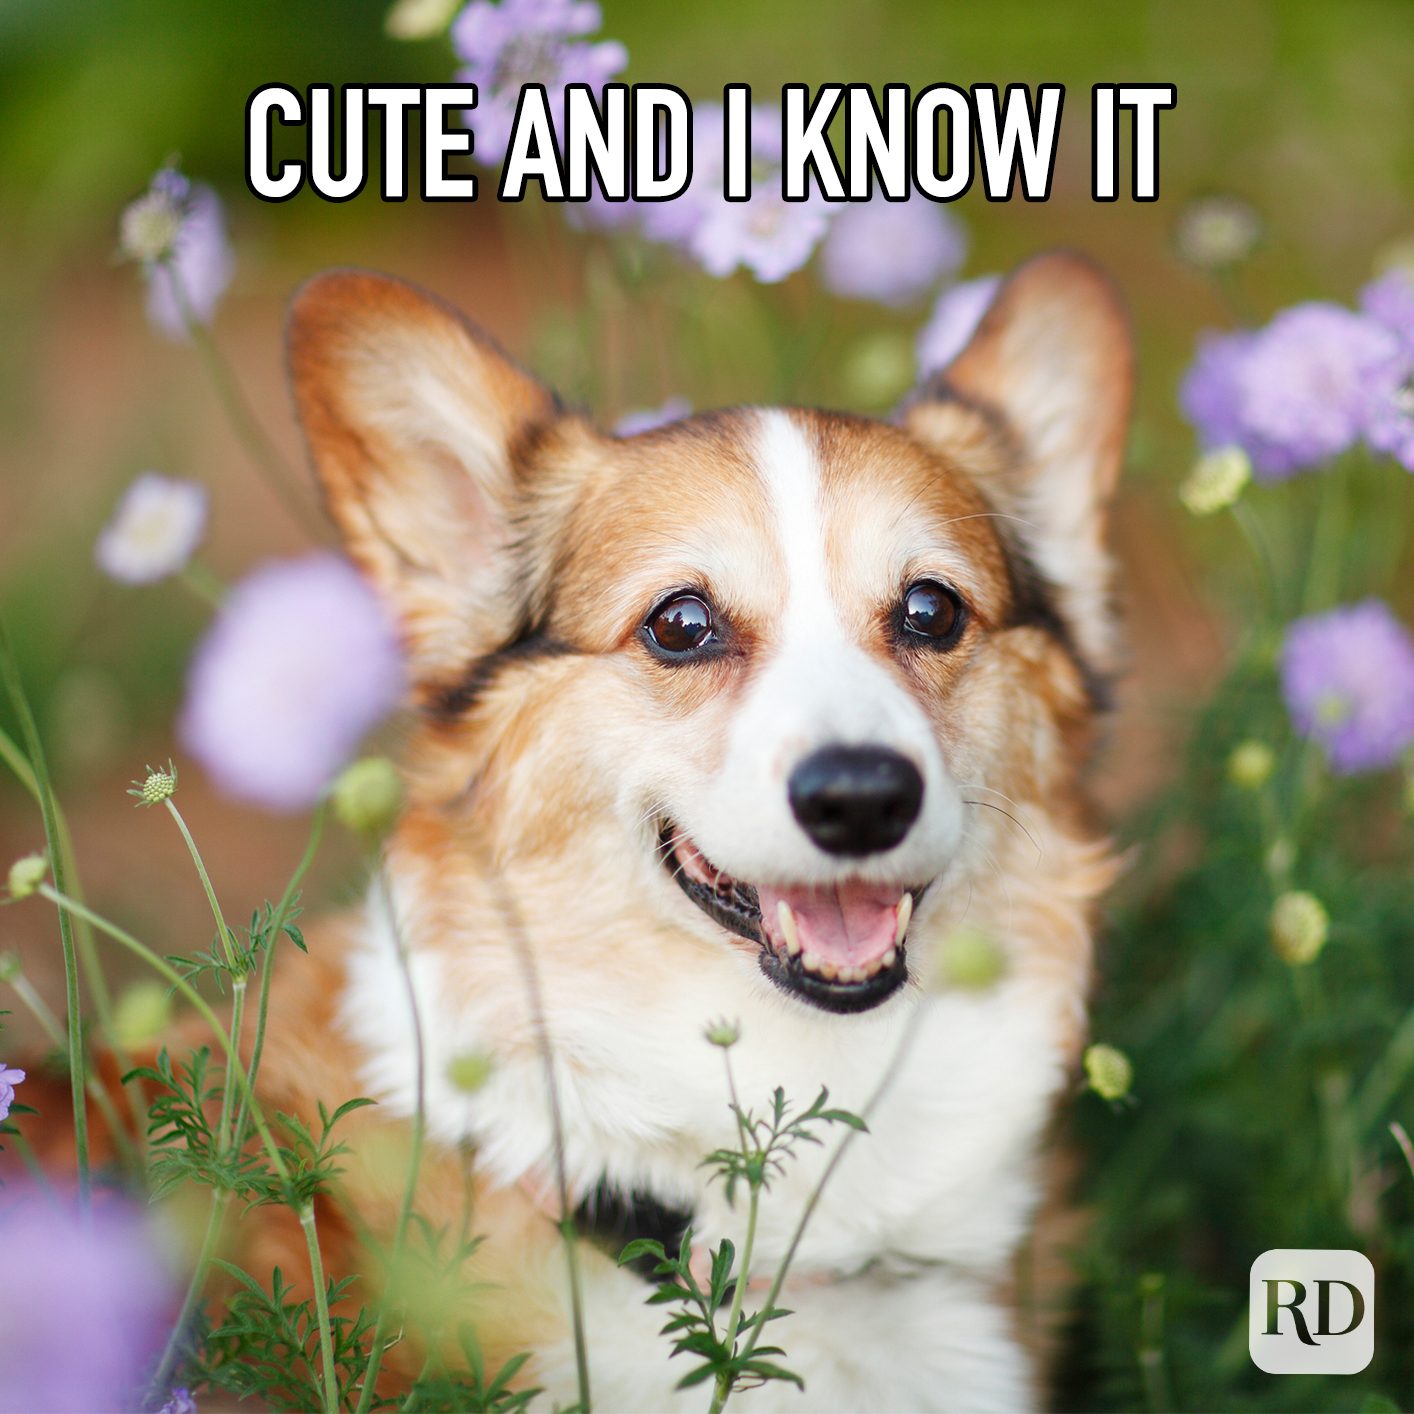 Cute And I Know It meme text over corgi sitting in flowers